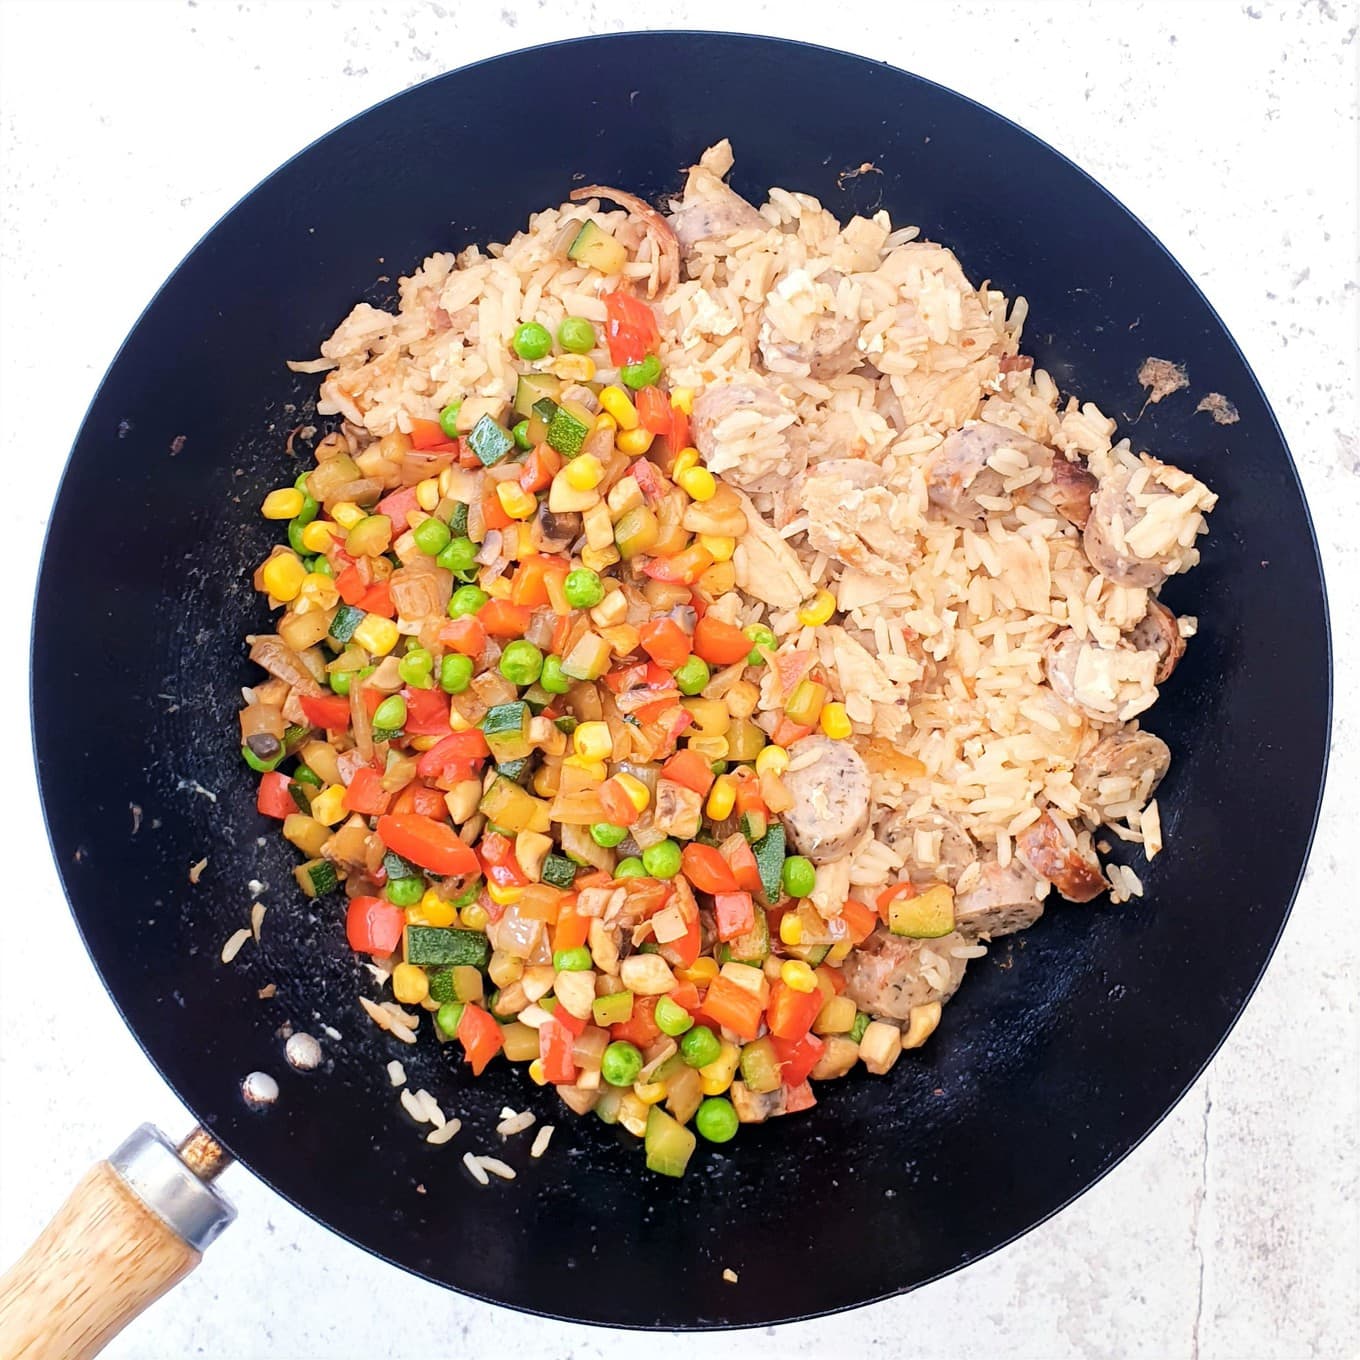 https://feastgloriousfeast.com/wp-content/uploads/2021/05/Leftover-Turkey-Fried-Rice-19.jpg